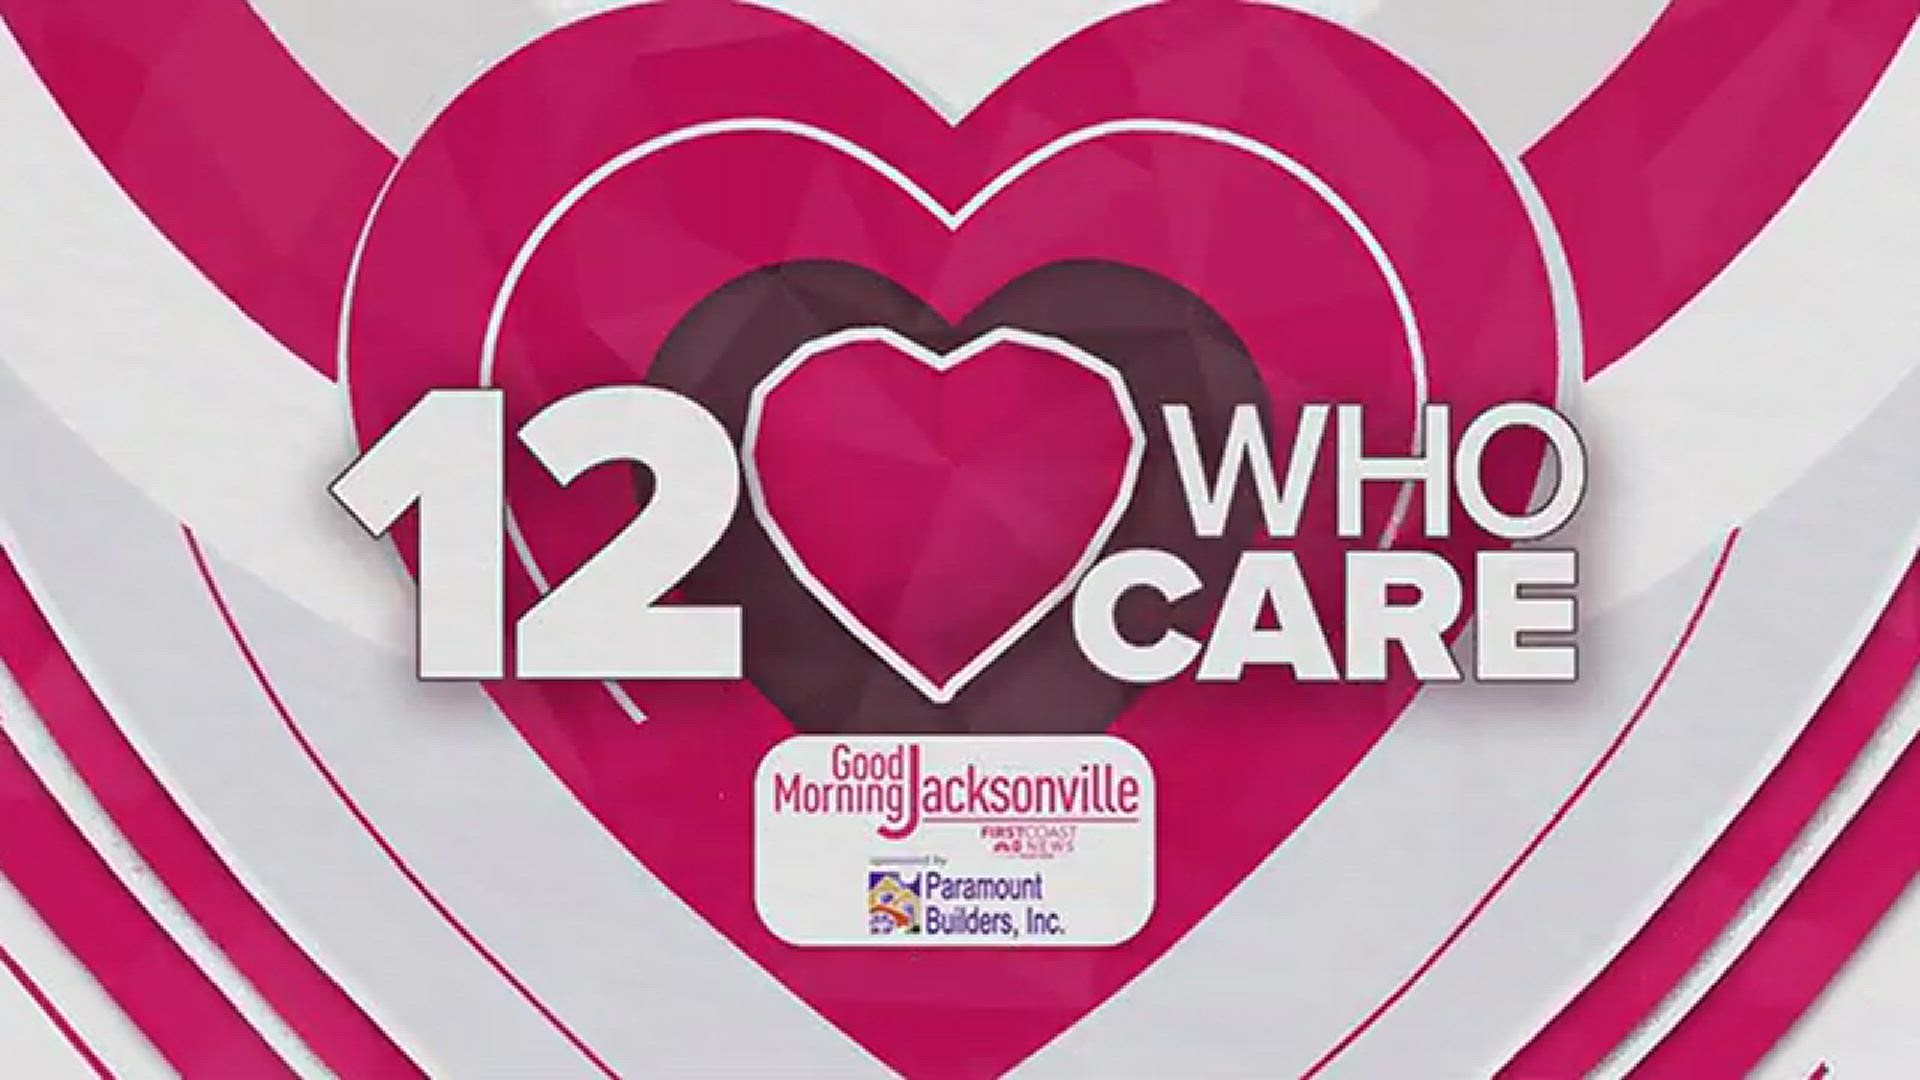 First Coast News' annual 12 Who Care awards recognize people in our area who go above and beyond to help others.